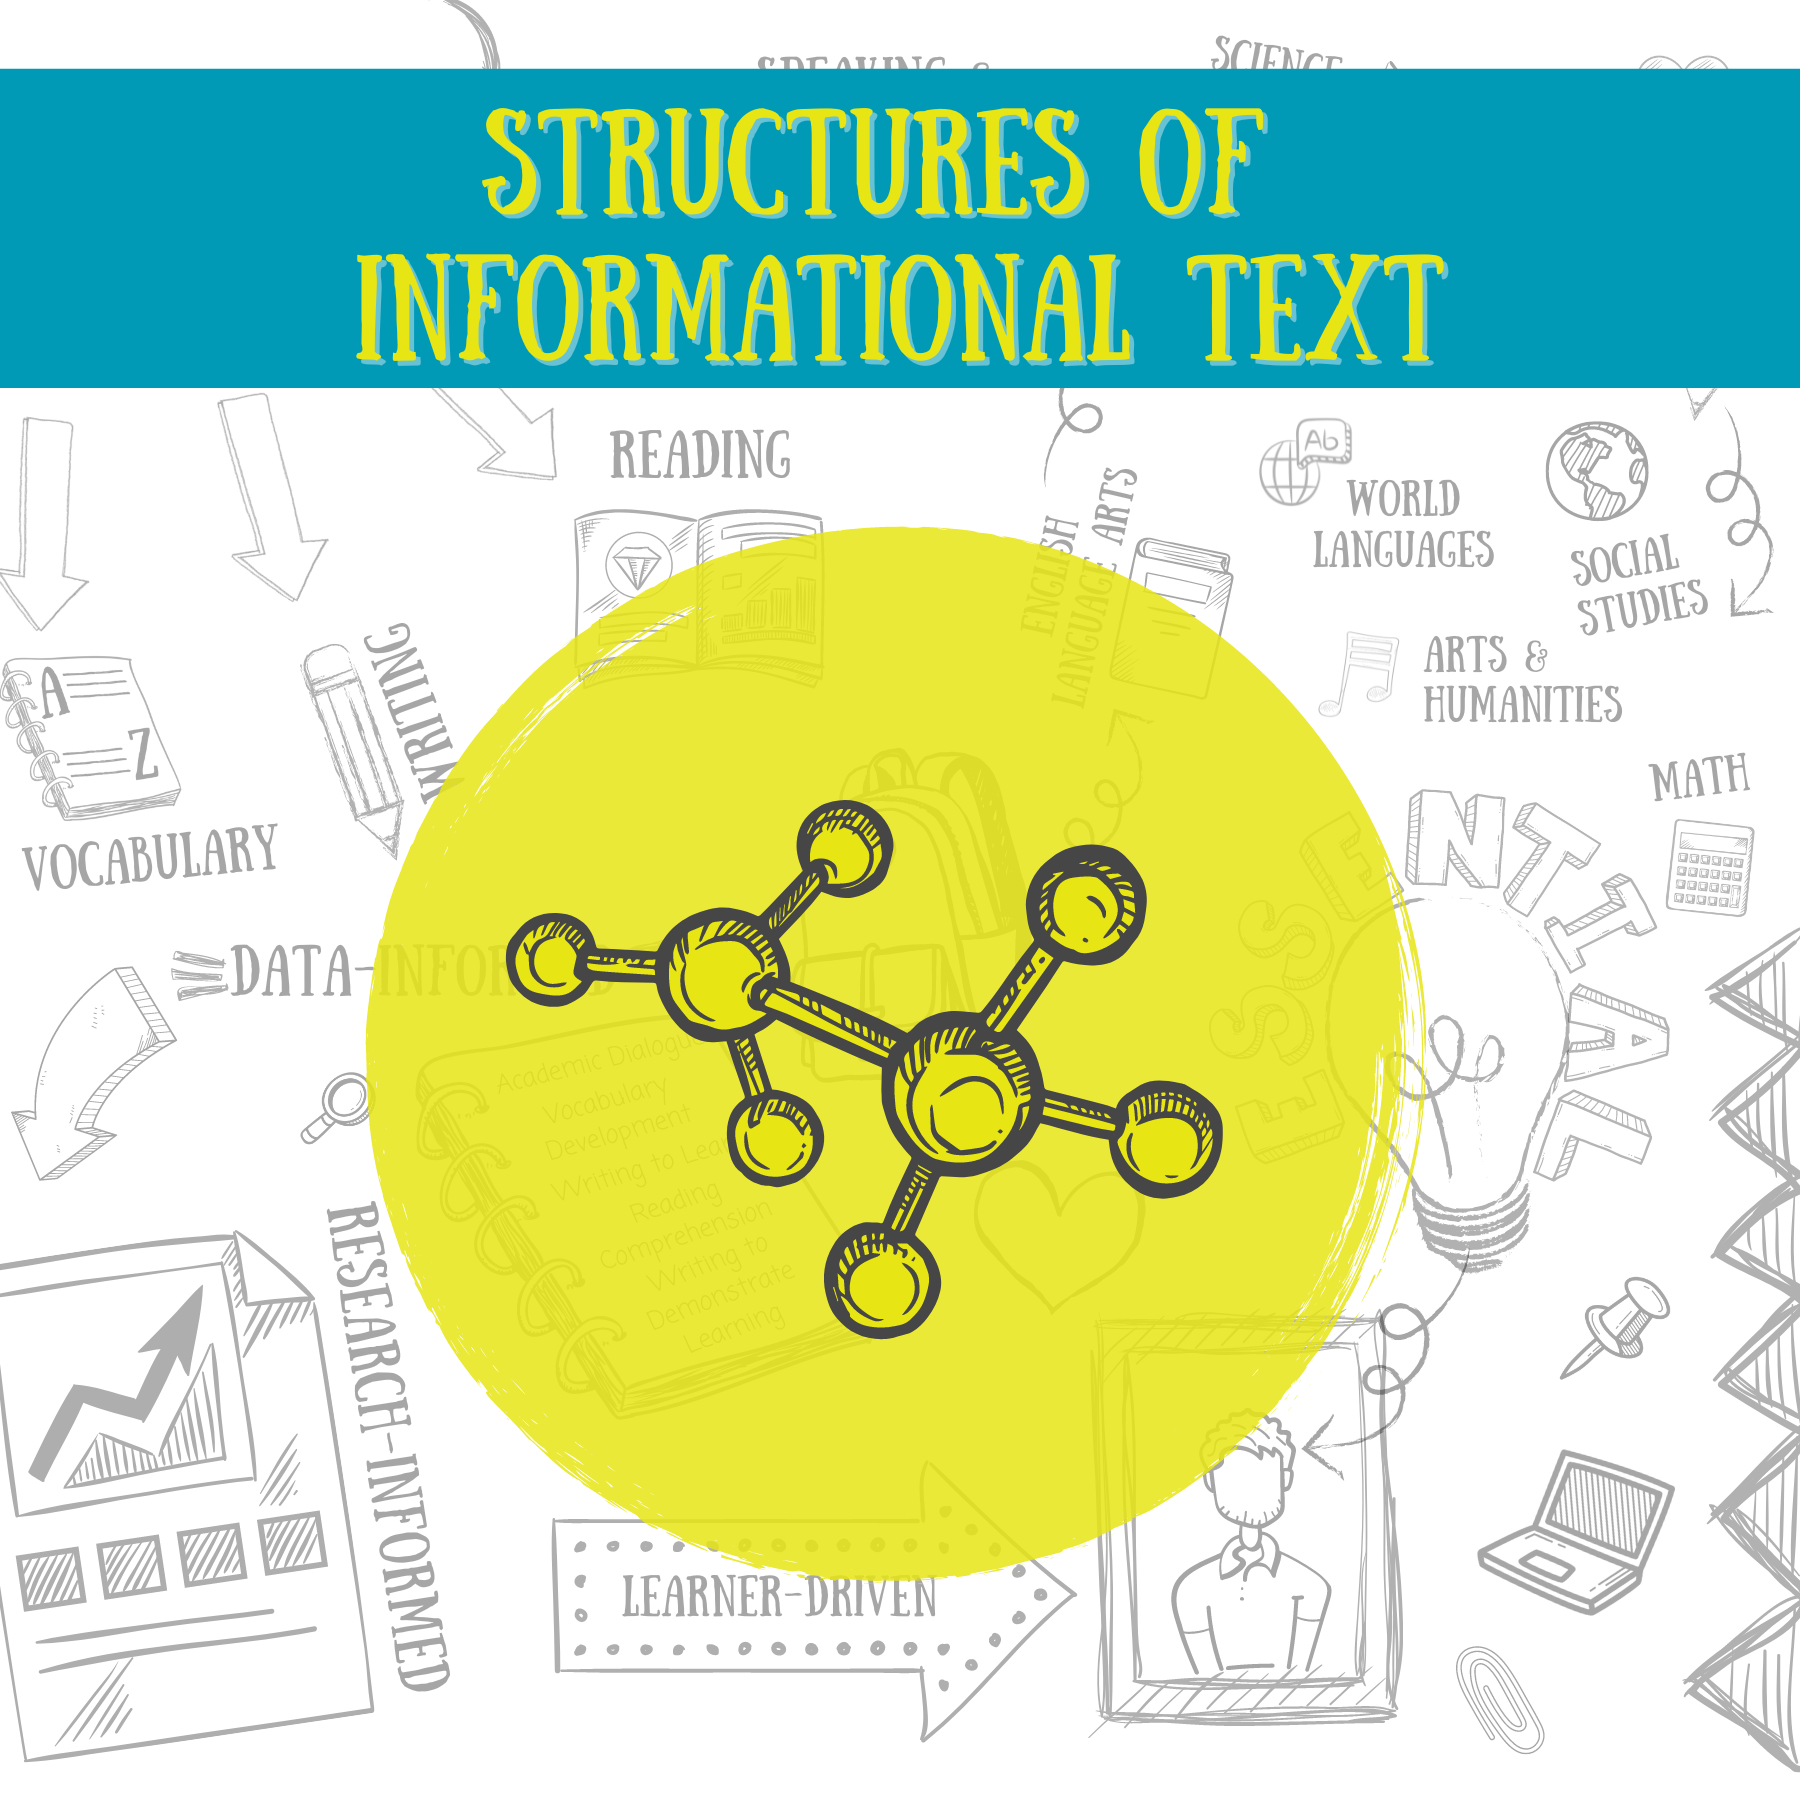 Structures of Informational Text